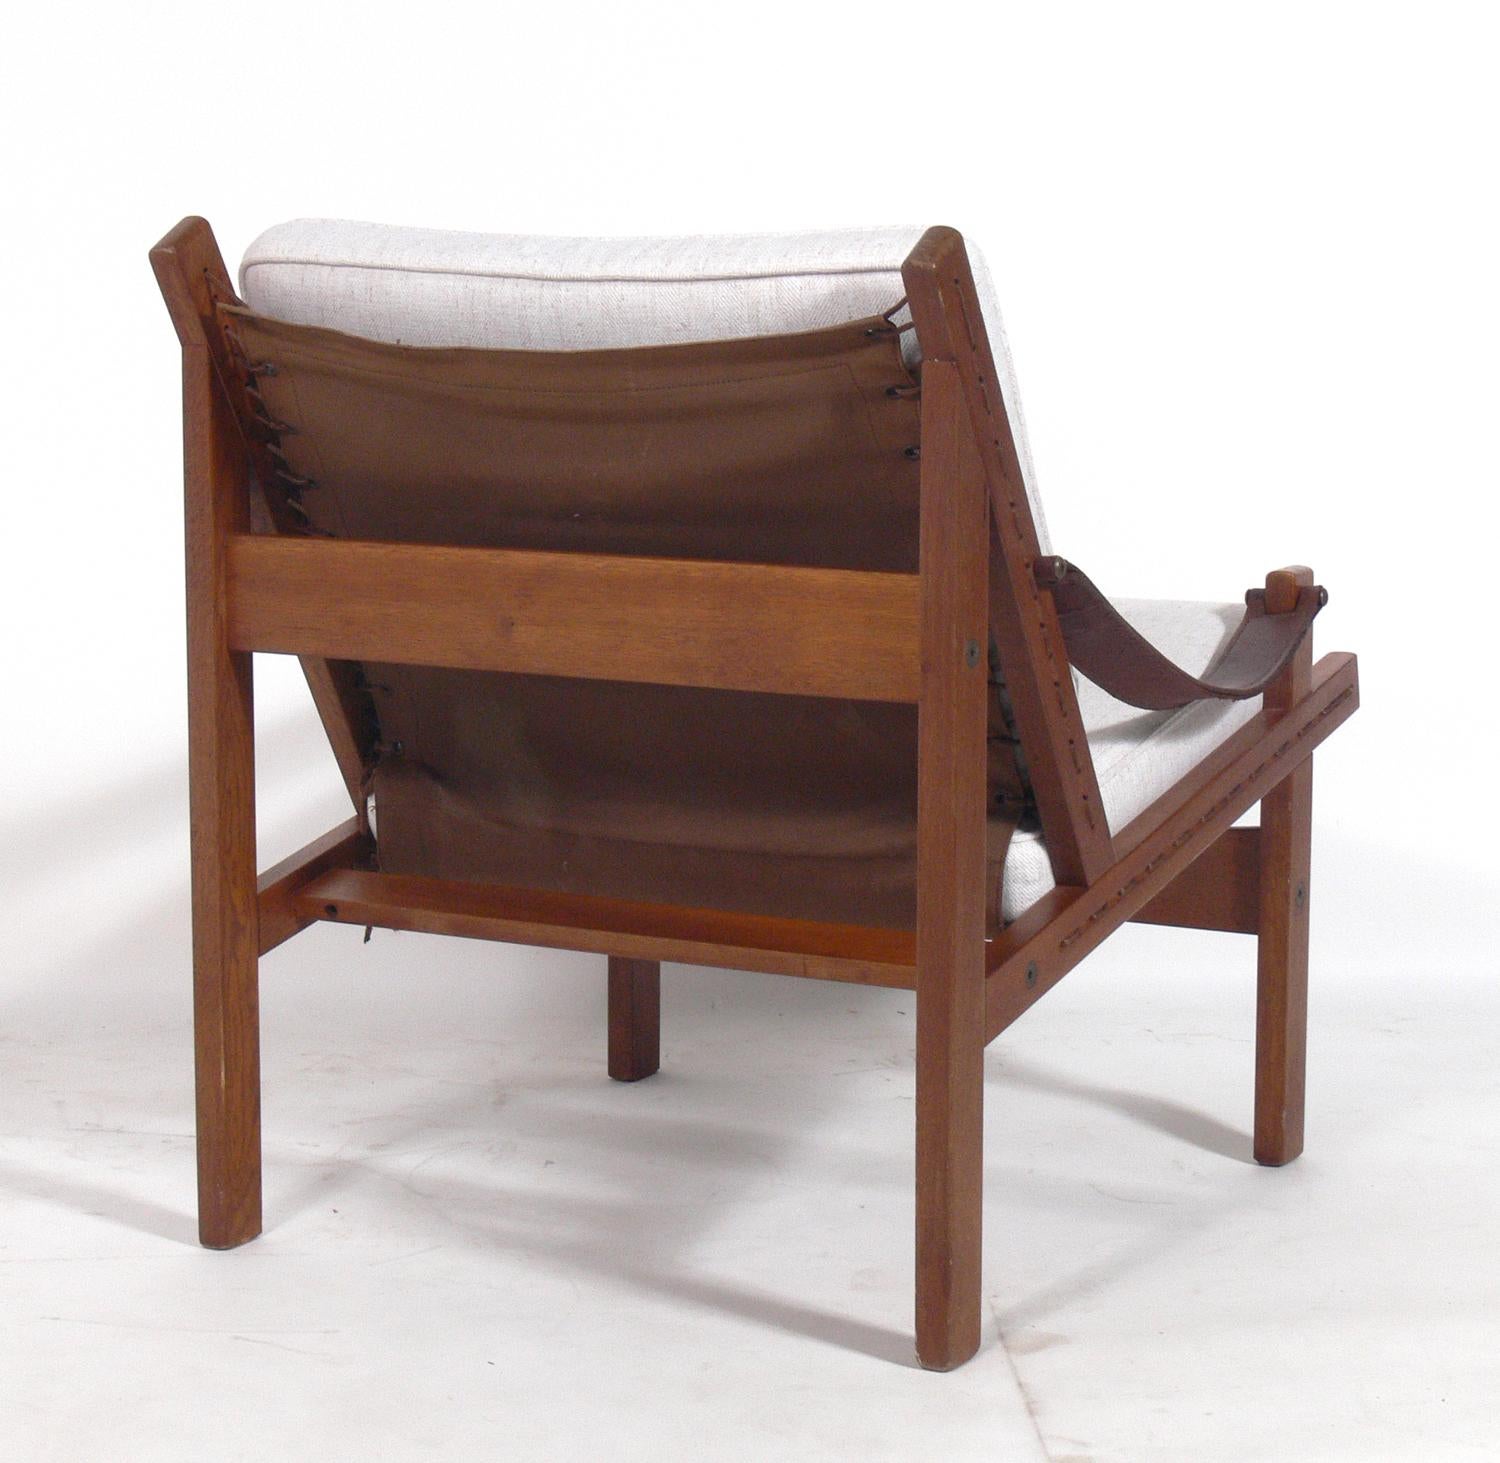 leather strap arm chair